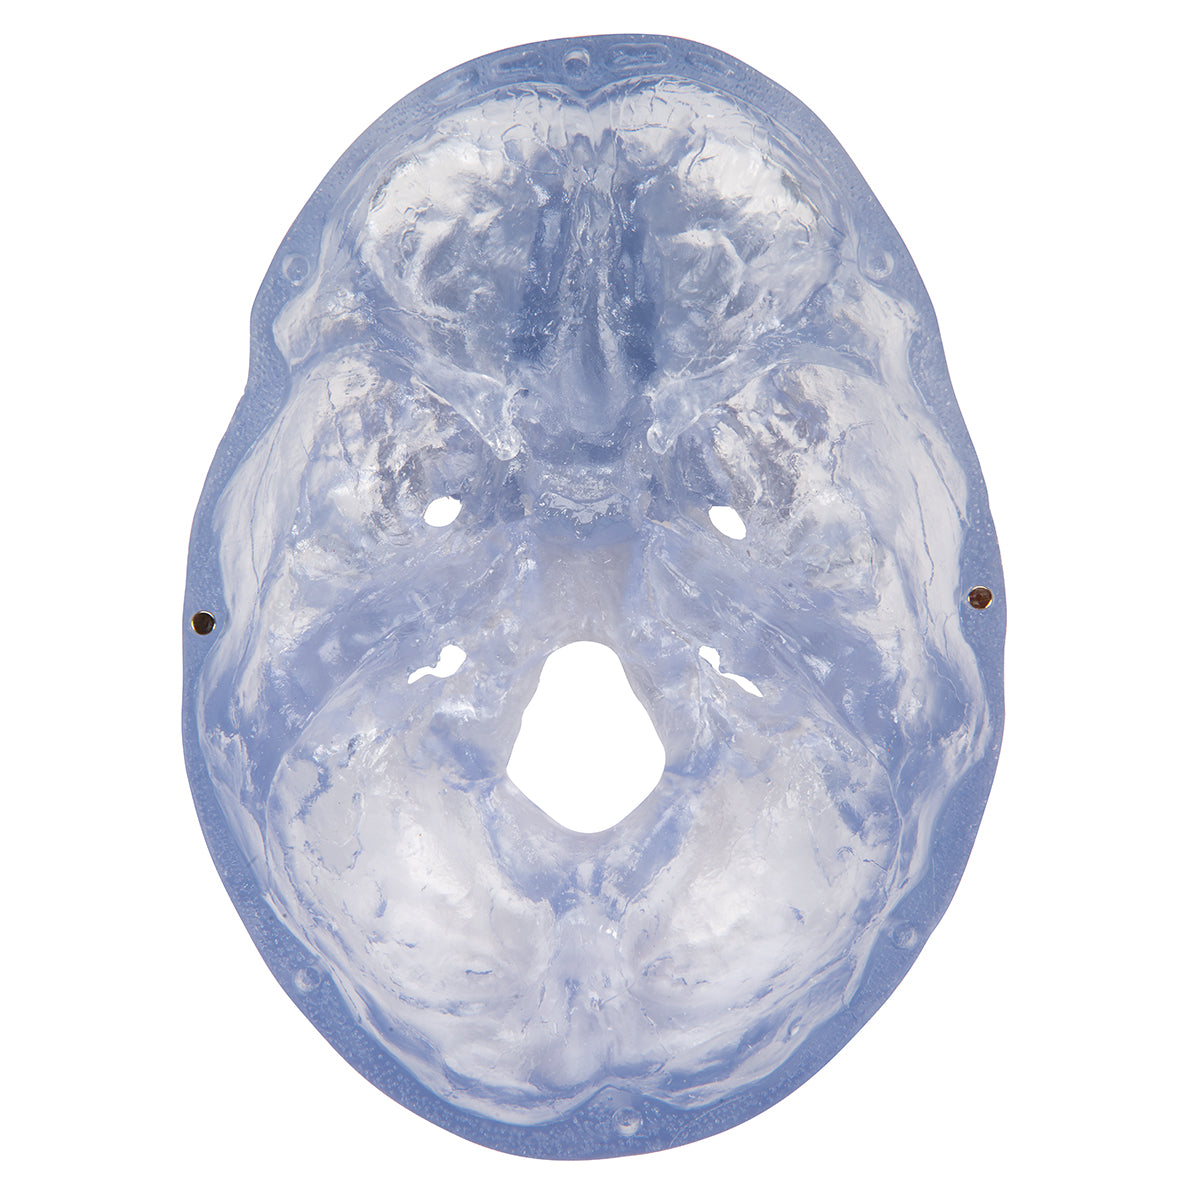 Transparent skull model that can be divided into 3